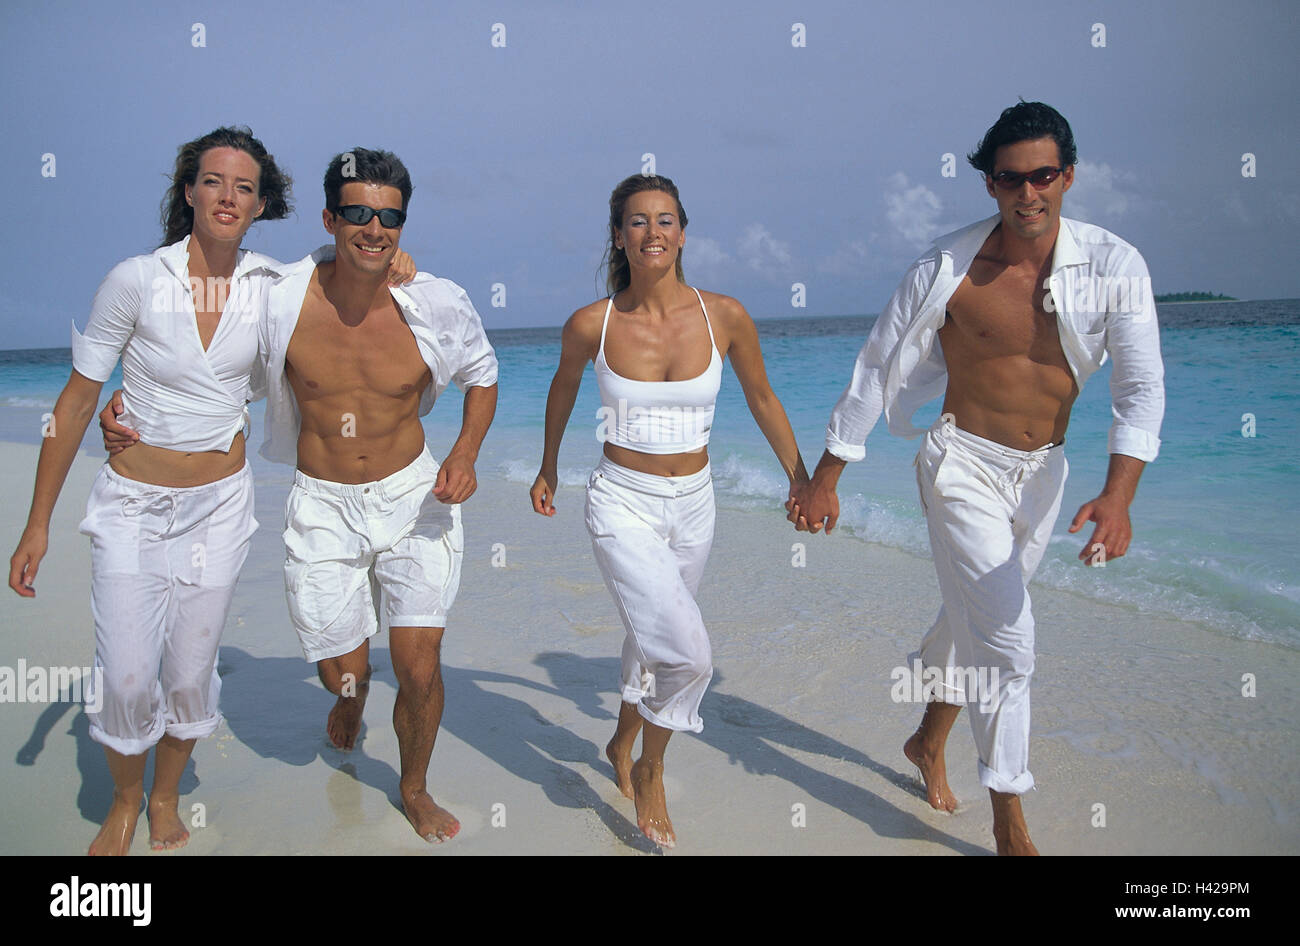 Couples, young, beach, run, happy, model released, men, women, people, outside, friends, four, people, happy, browned, holiday acquaintance, lifestyle, vacation, recreation, sea, with each other, leisurewear, clothes, white, fun, exuberance, Stock Photo